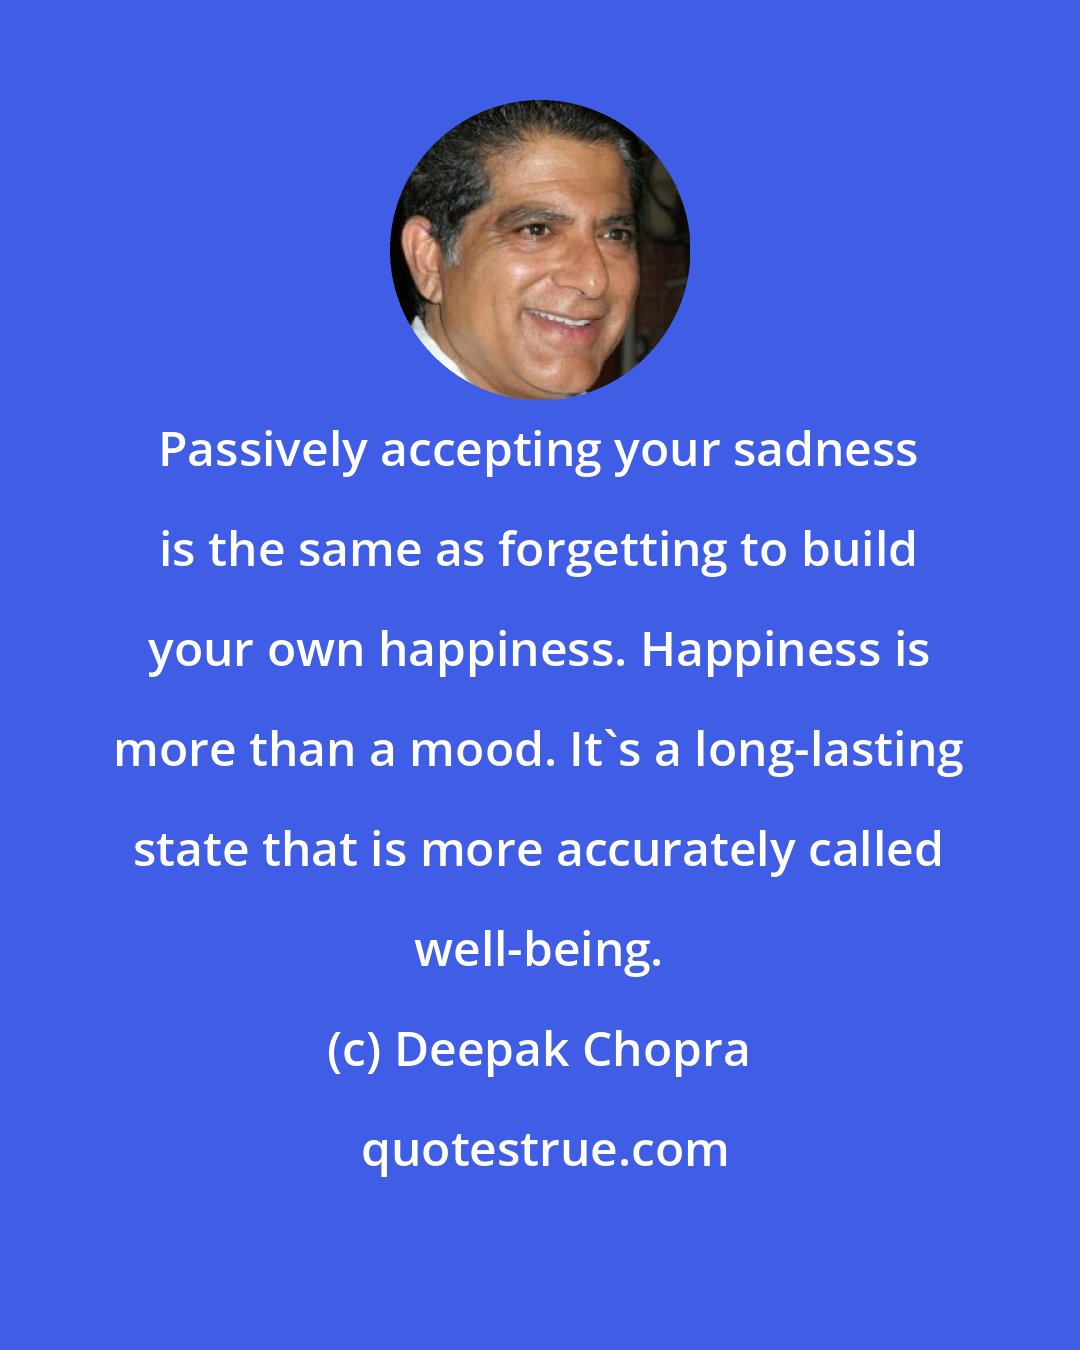 Deepak Chopra: Passively accepting your sadness is the same as forgetting to build your own happiness. Happiness is more than a mood. It's a long-lasting state that is more accurately called well-being.